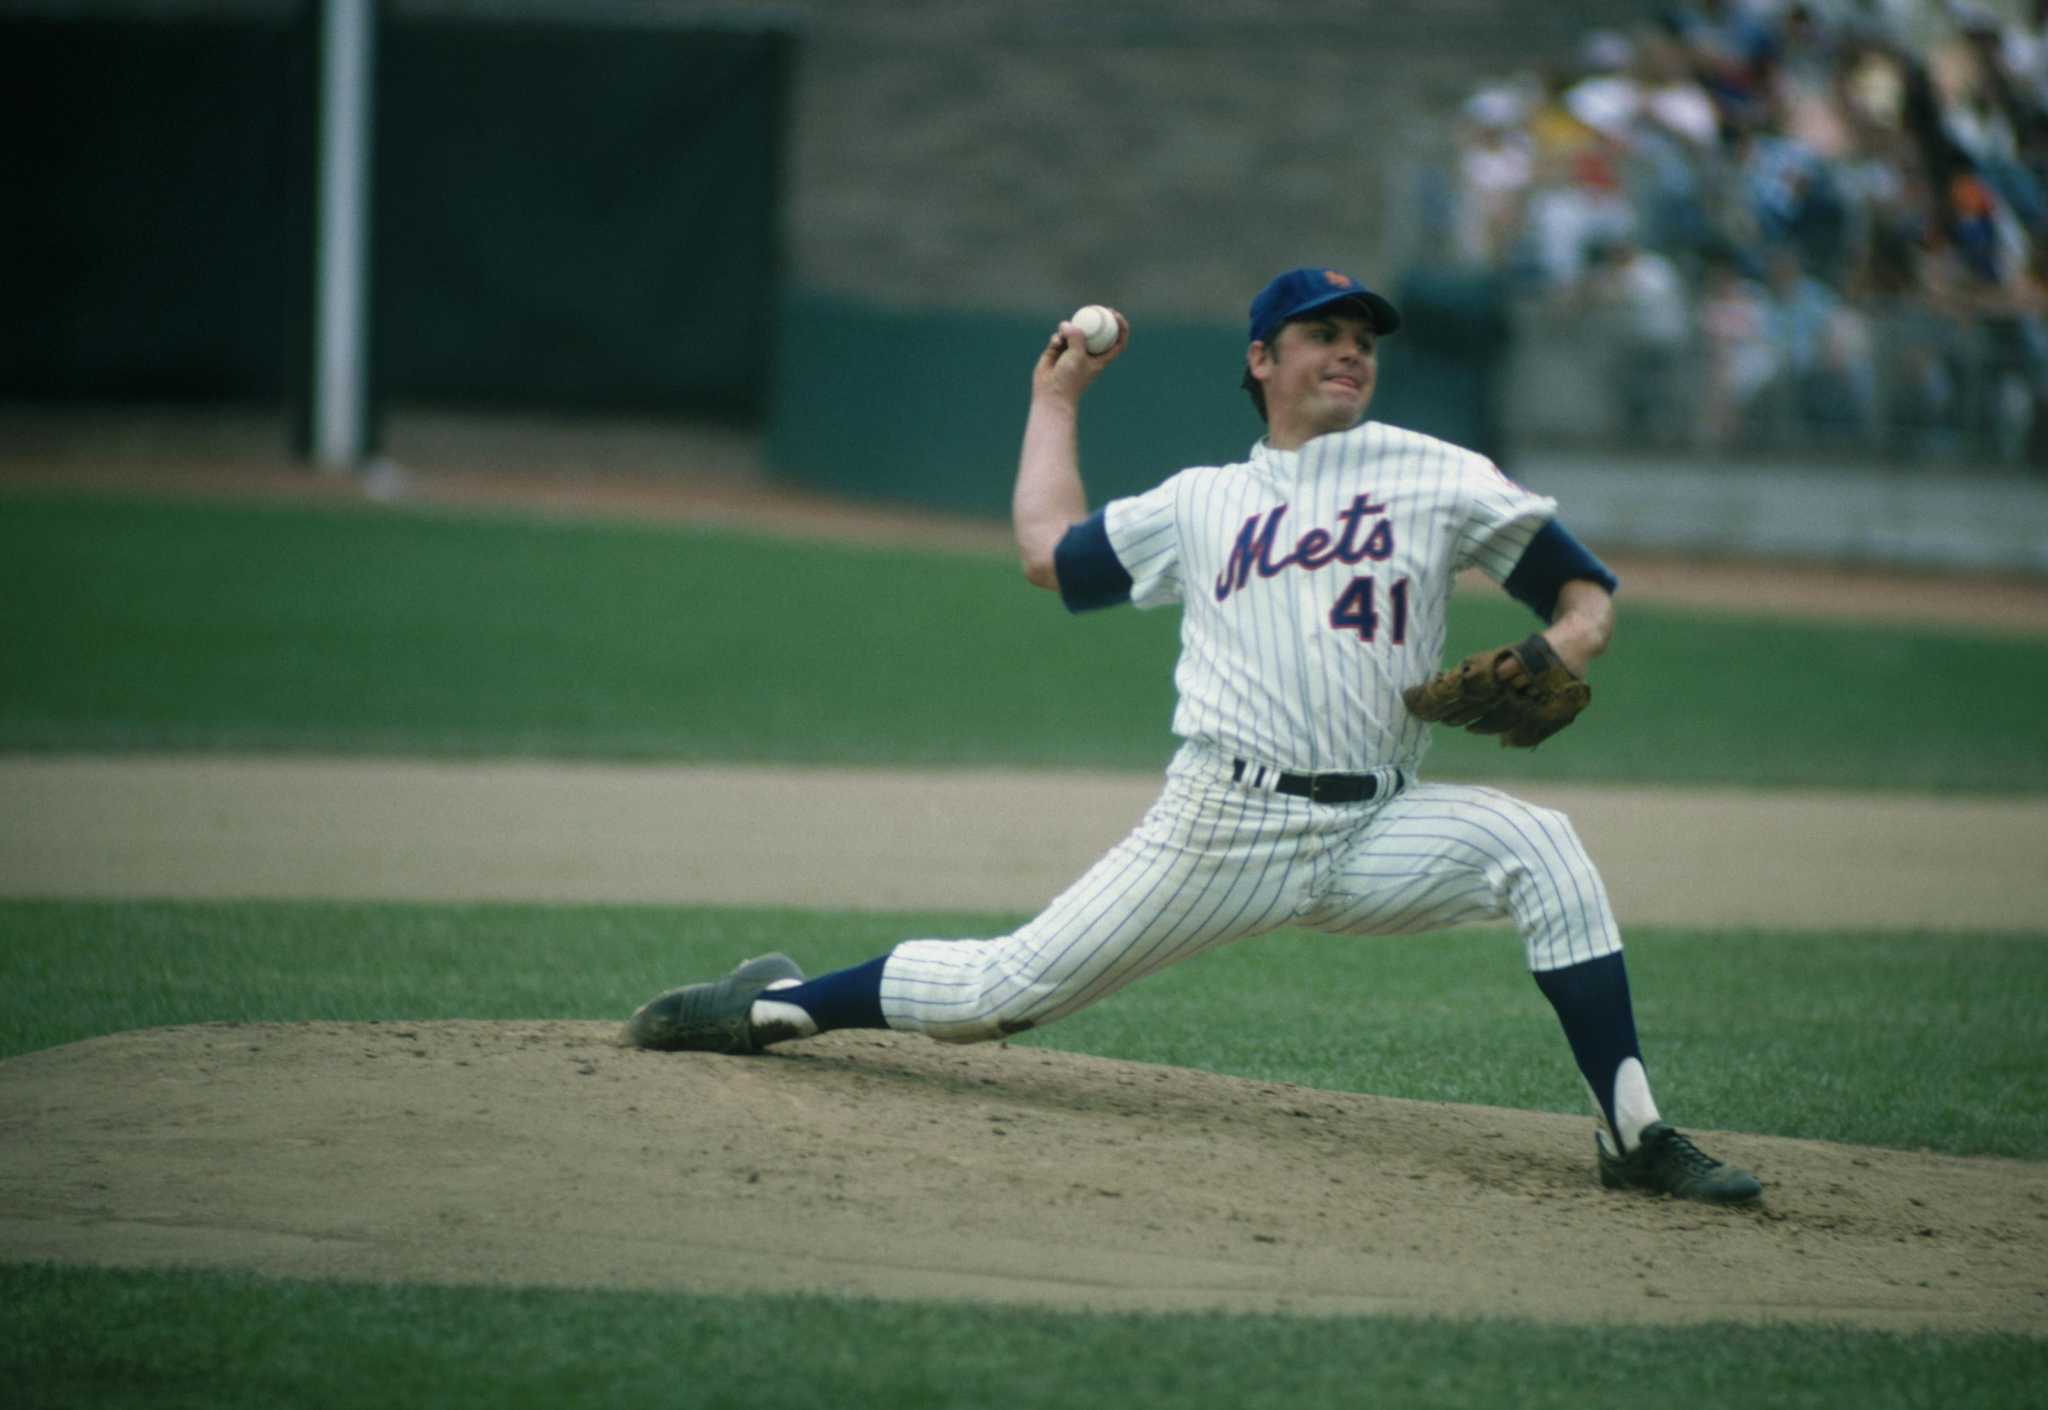 Tom Seaver, Hall of Fame pitcher behind the Miracle Mets, dies aged 75, New York Mets